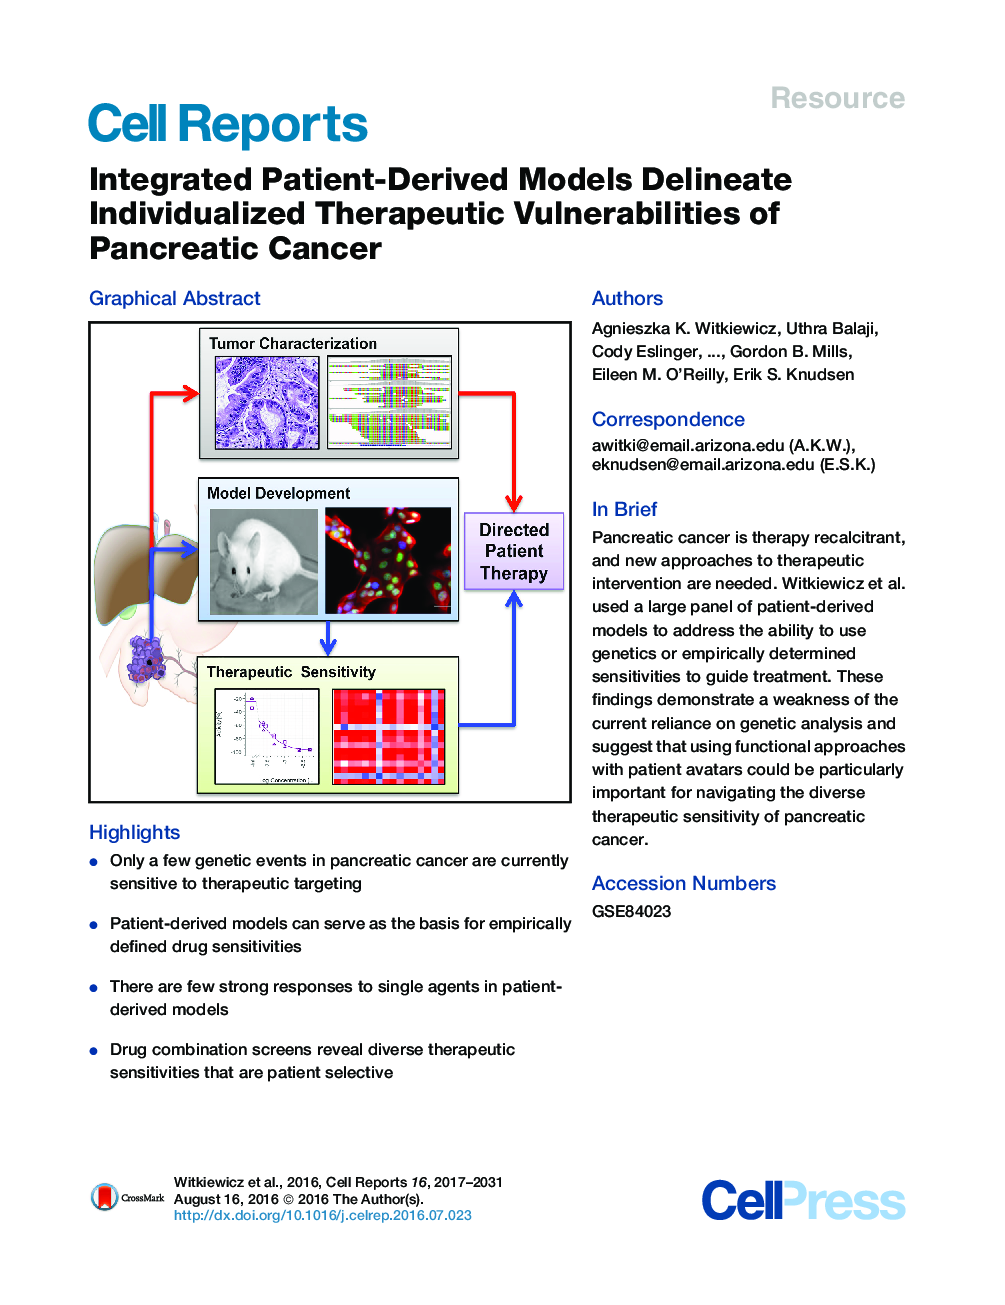 Integrated Patient-Derived Models Delineate Individualized Therapeutic Vulnerabilities of Pancreatic Cancer